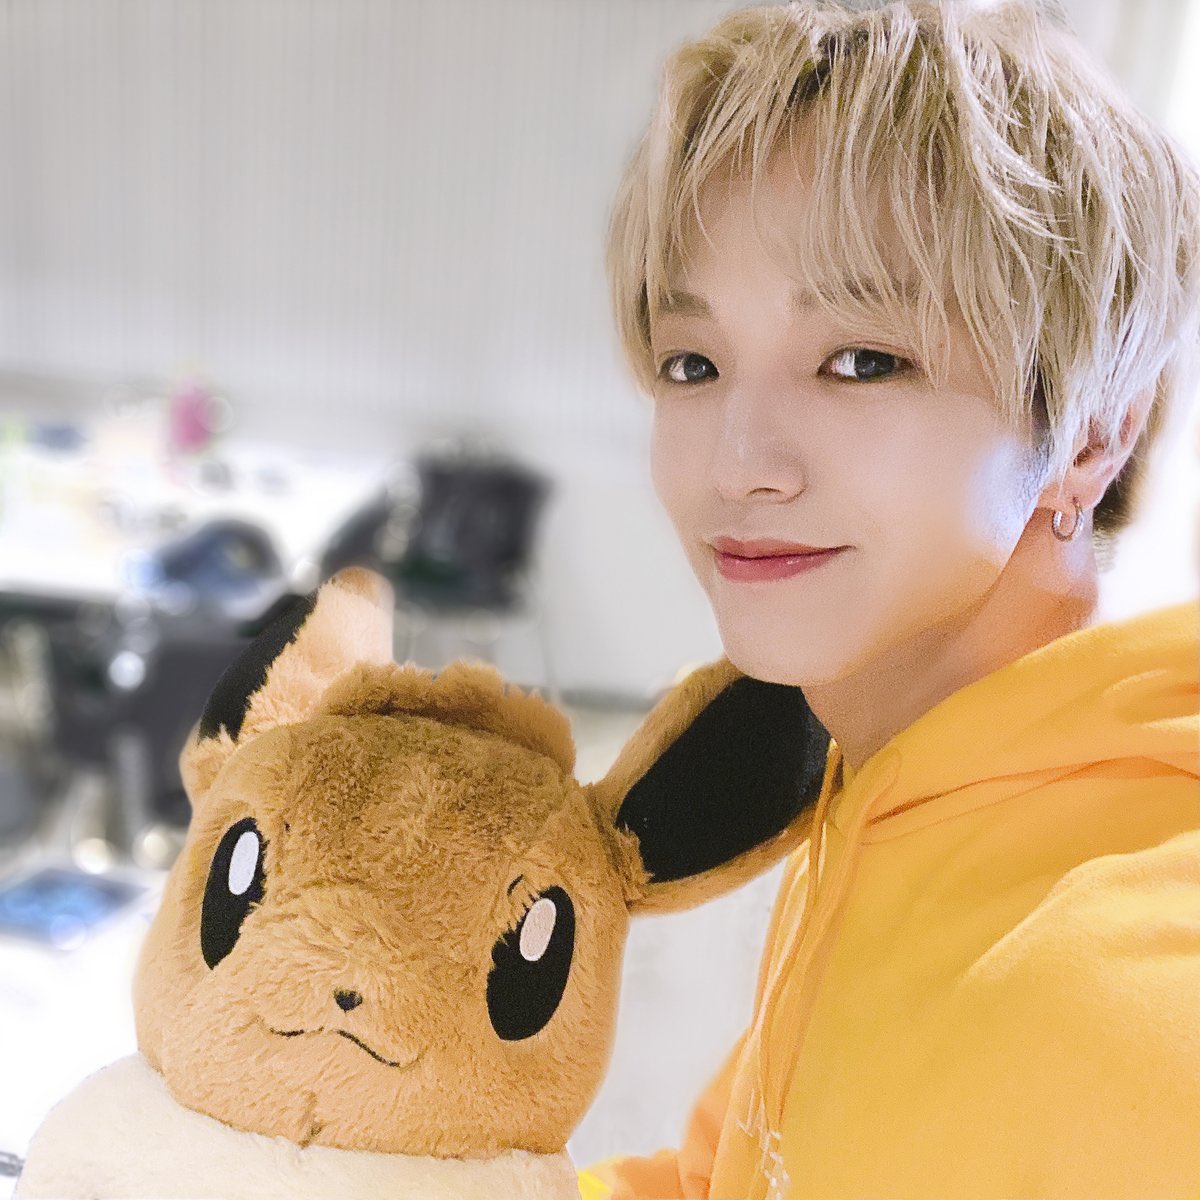 Ohira Shosei as Pikachu- Shosei, I know your favourite is Eevee but you literally look like pikachu- yellow and soft - their strong side hits you in unexpected moments